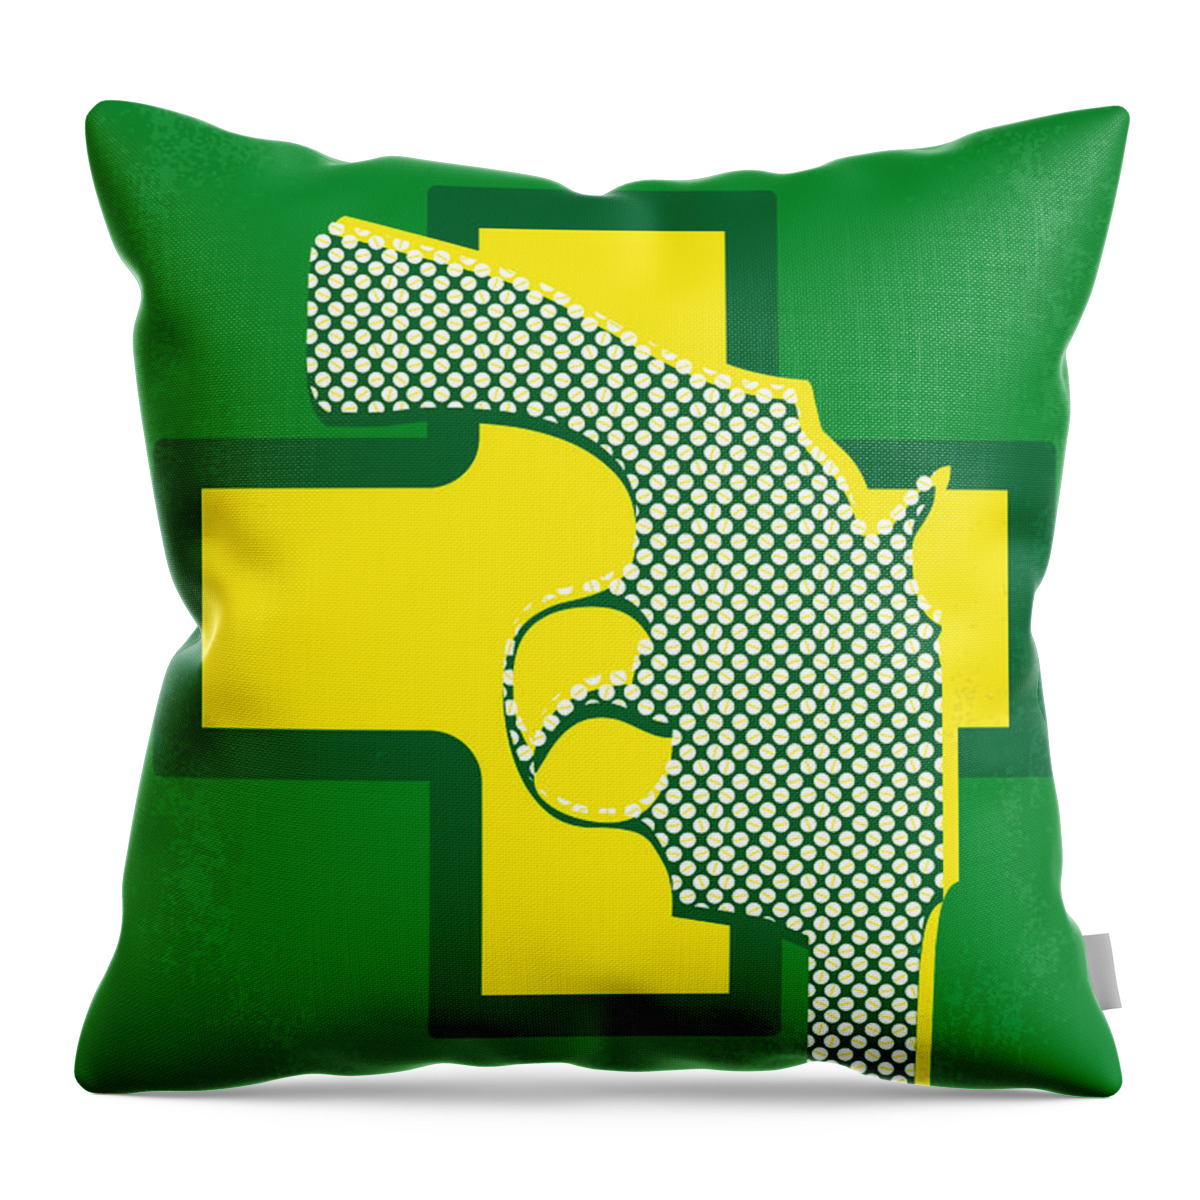 Drugstore Cowboy Throw Pillow featuring the digital art No628 My Drugstore Cowboy minimal movie poster by Chungkong Art